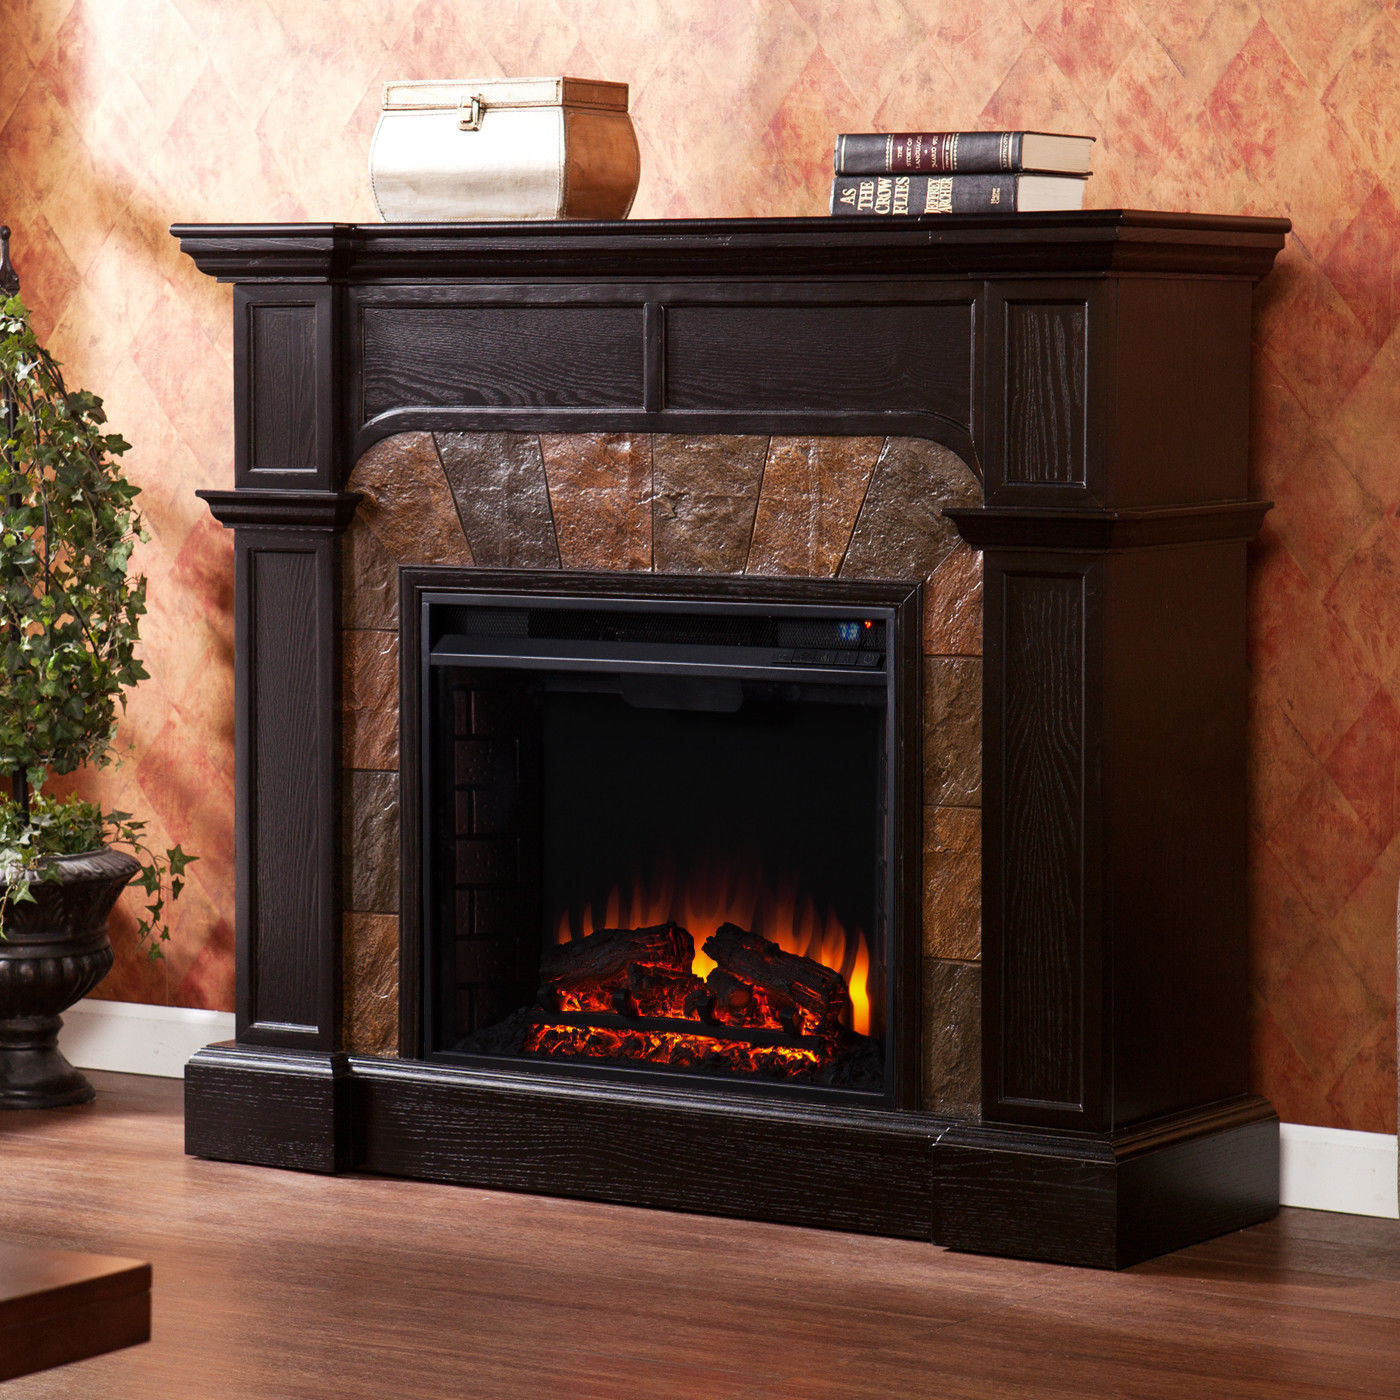 Large Electric Fireplace With Mantel
 Electric Fireplace With Mantel 1500w Freestanding